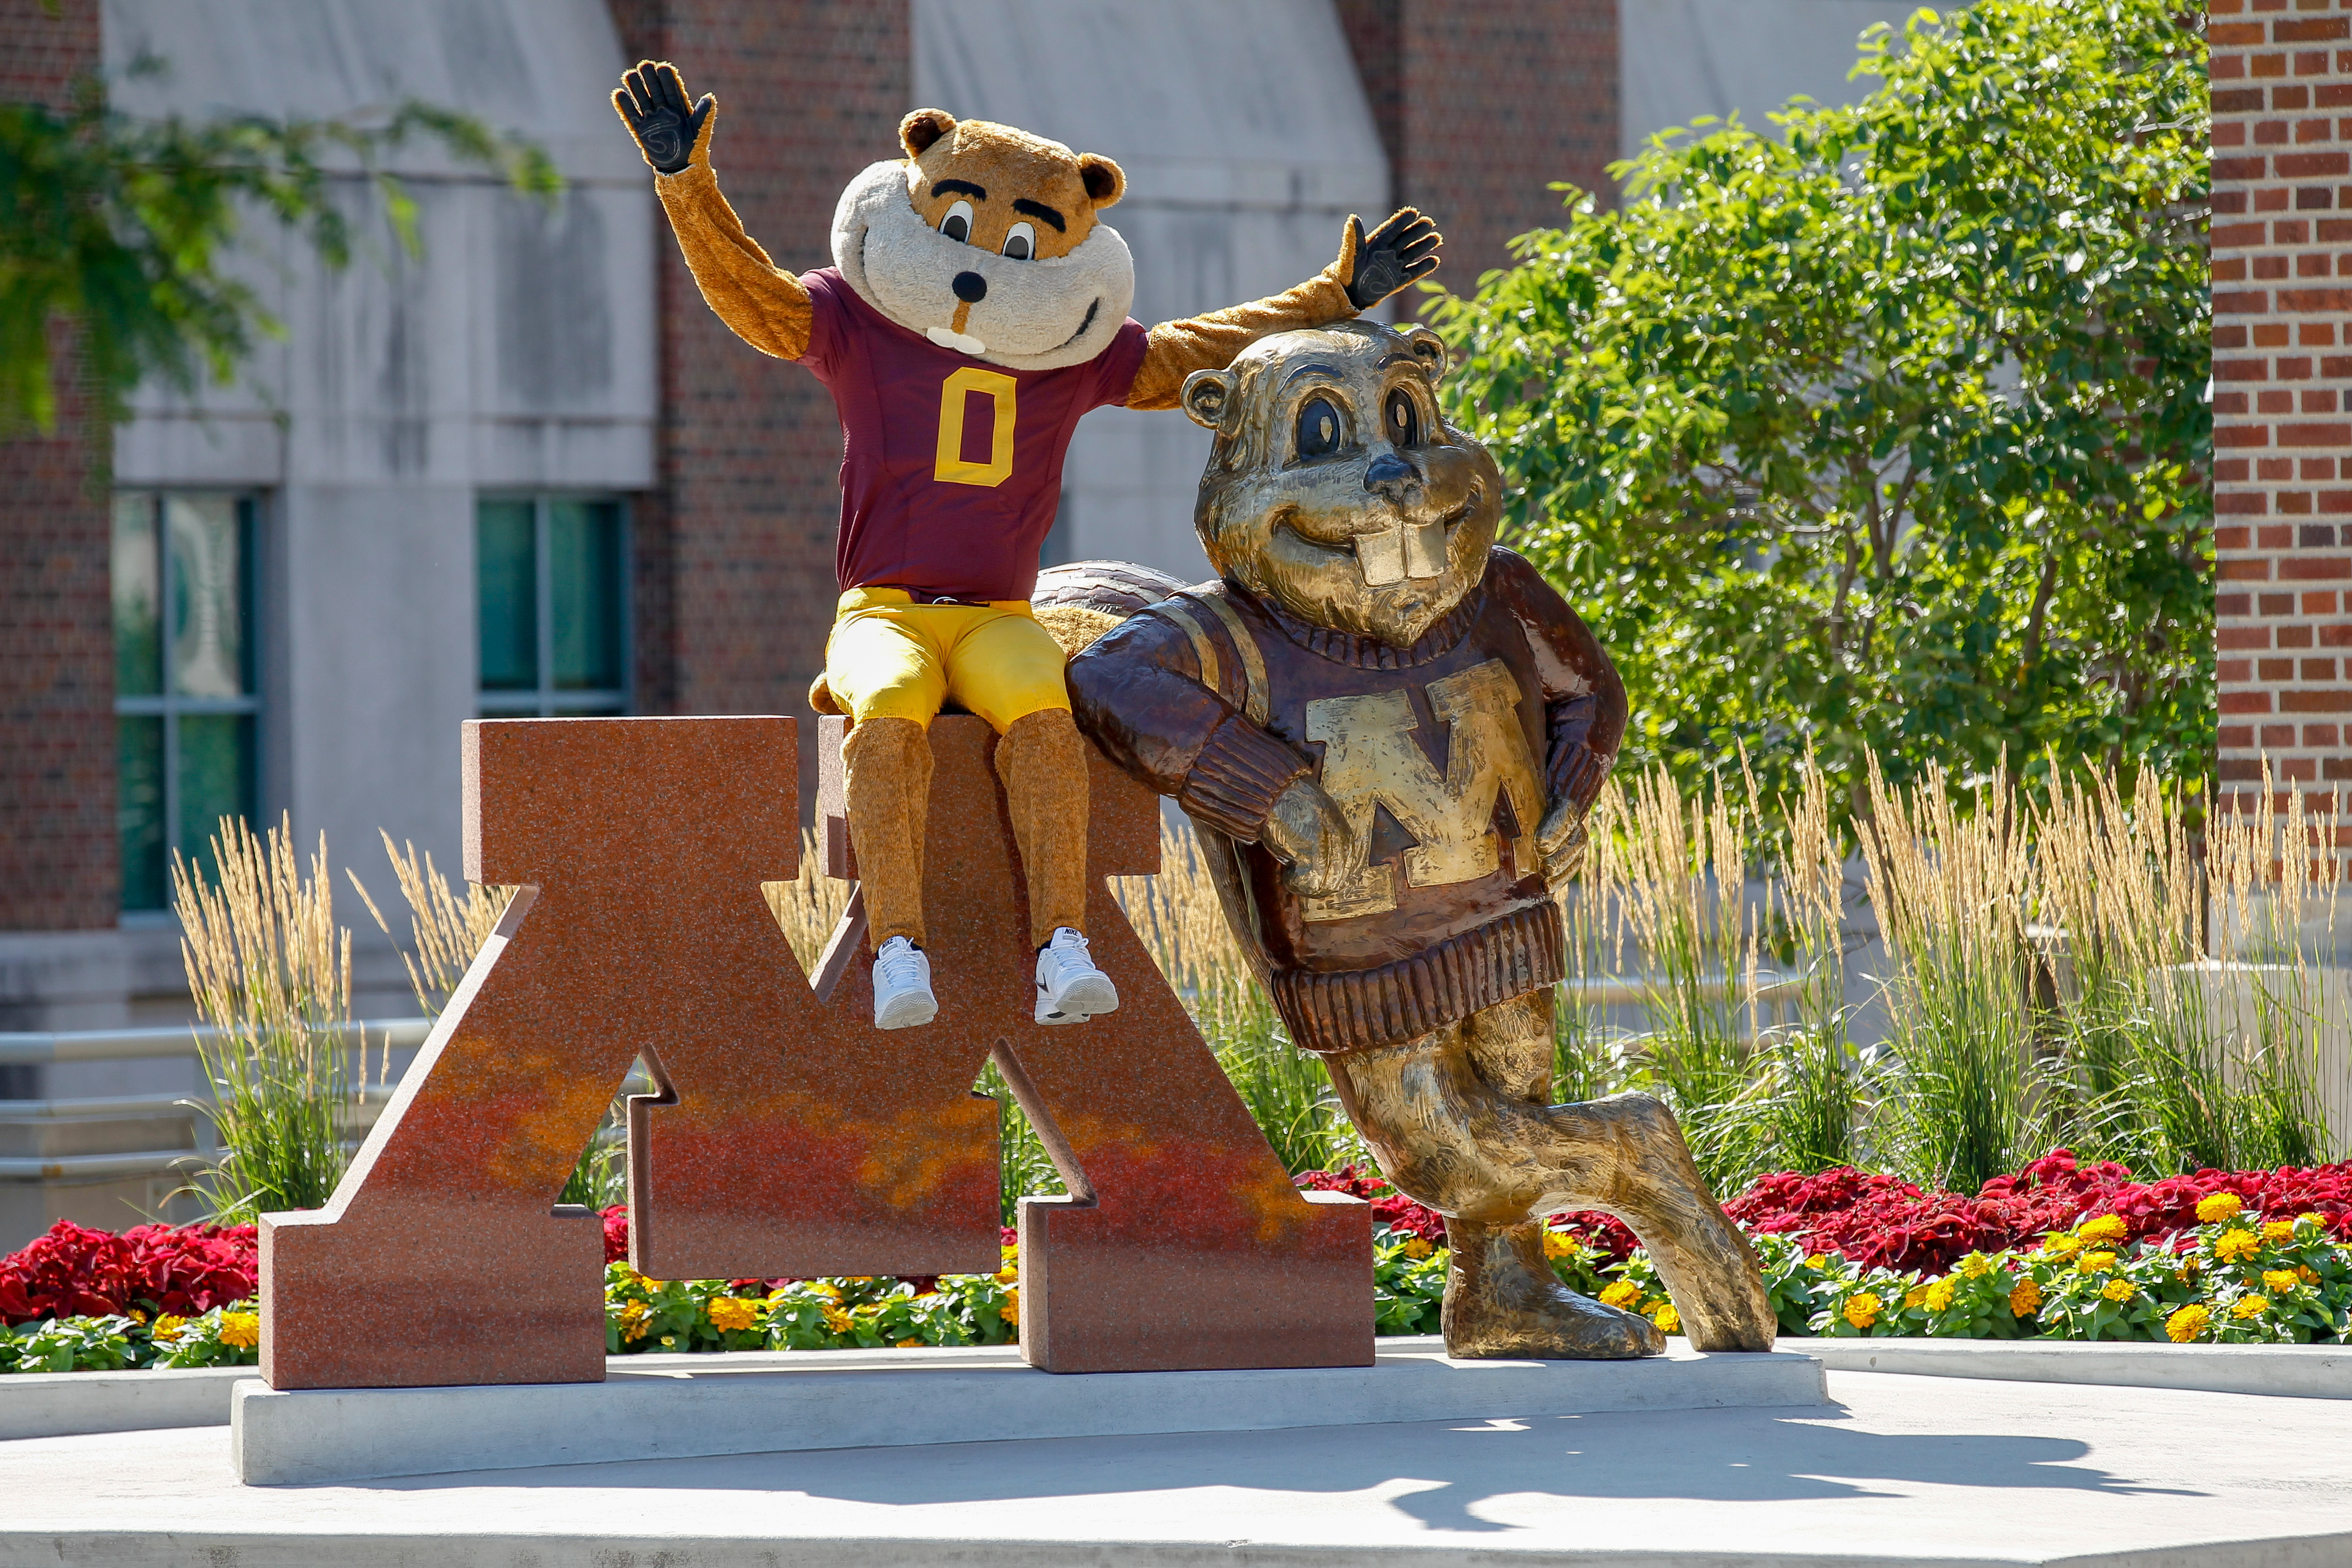 Goldy the Gopher sitting on the Goldy statue